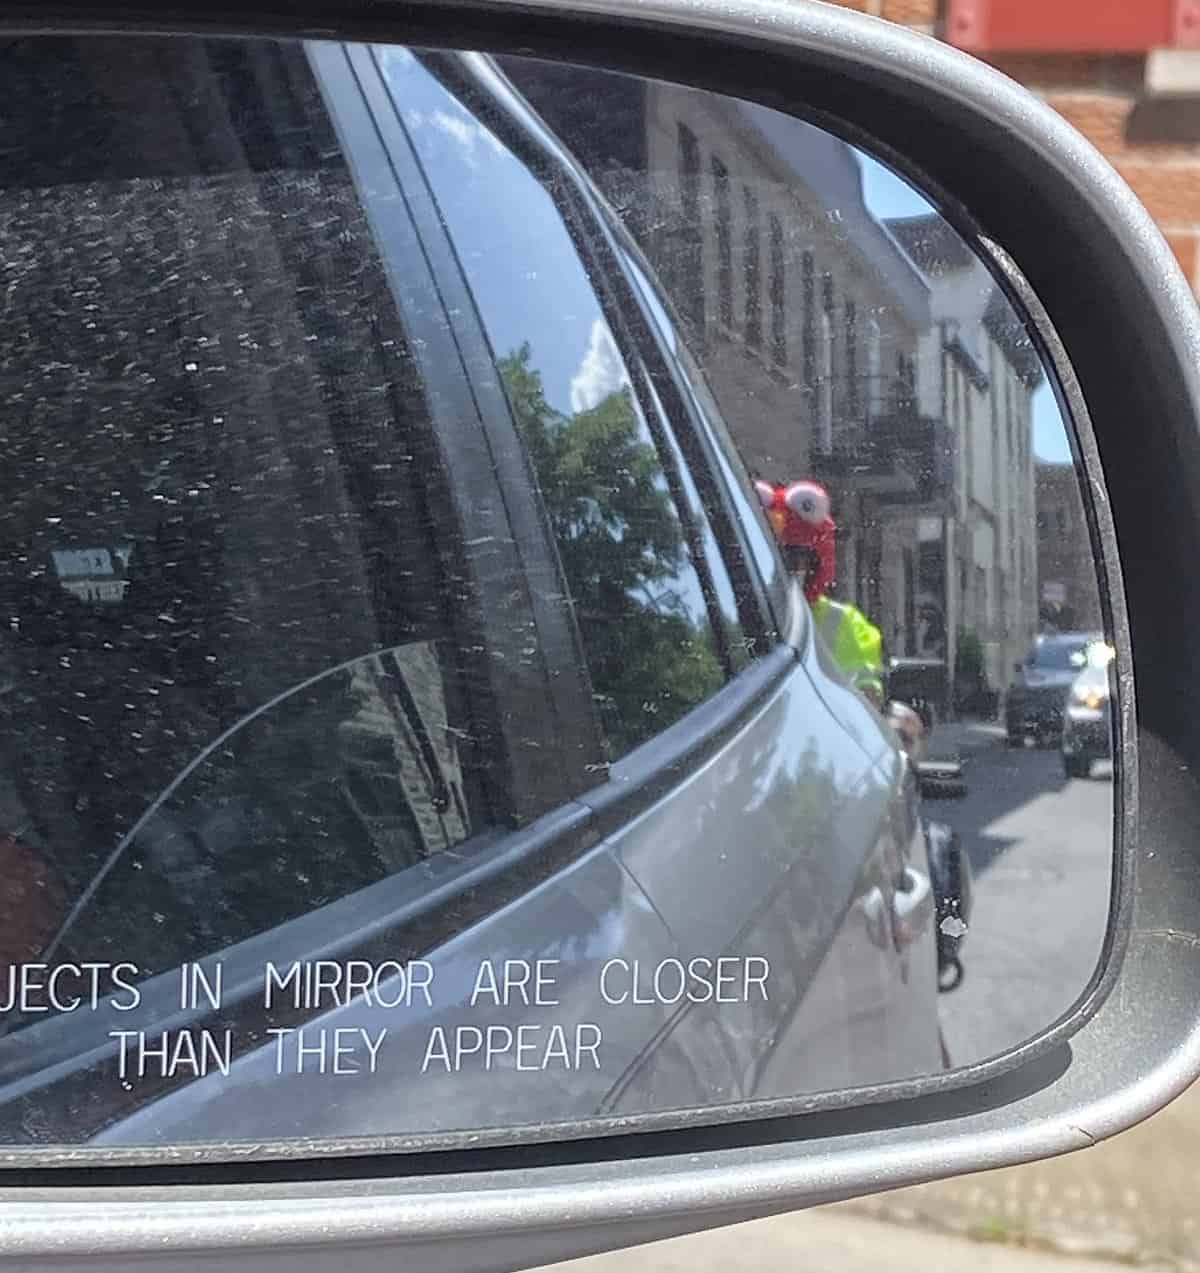 Image of Elmo face in a car side view window.